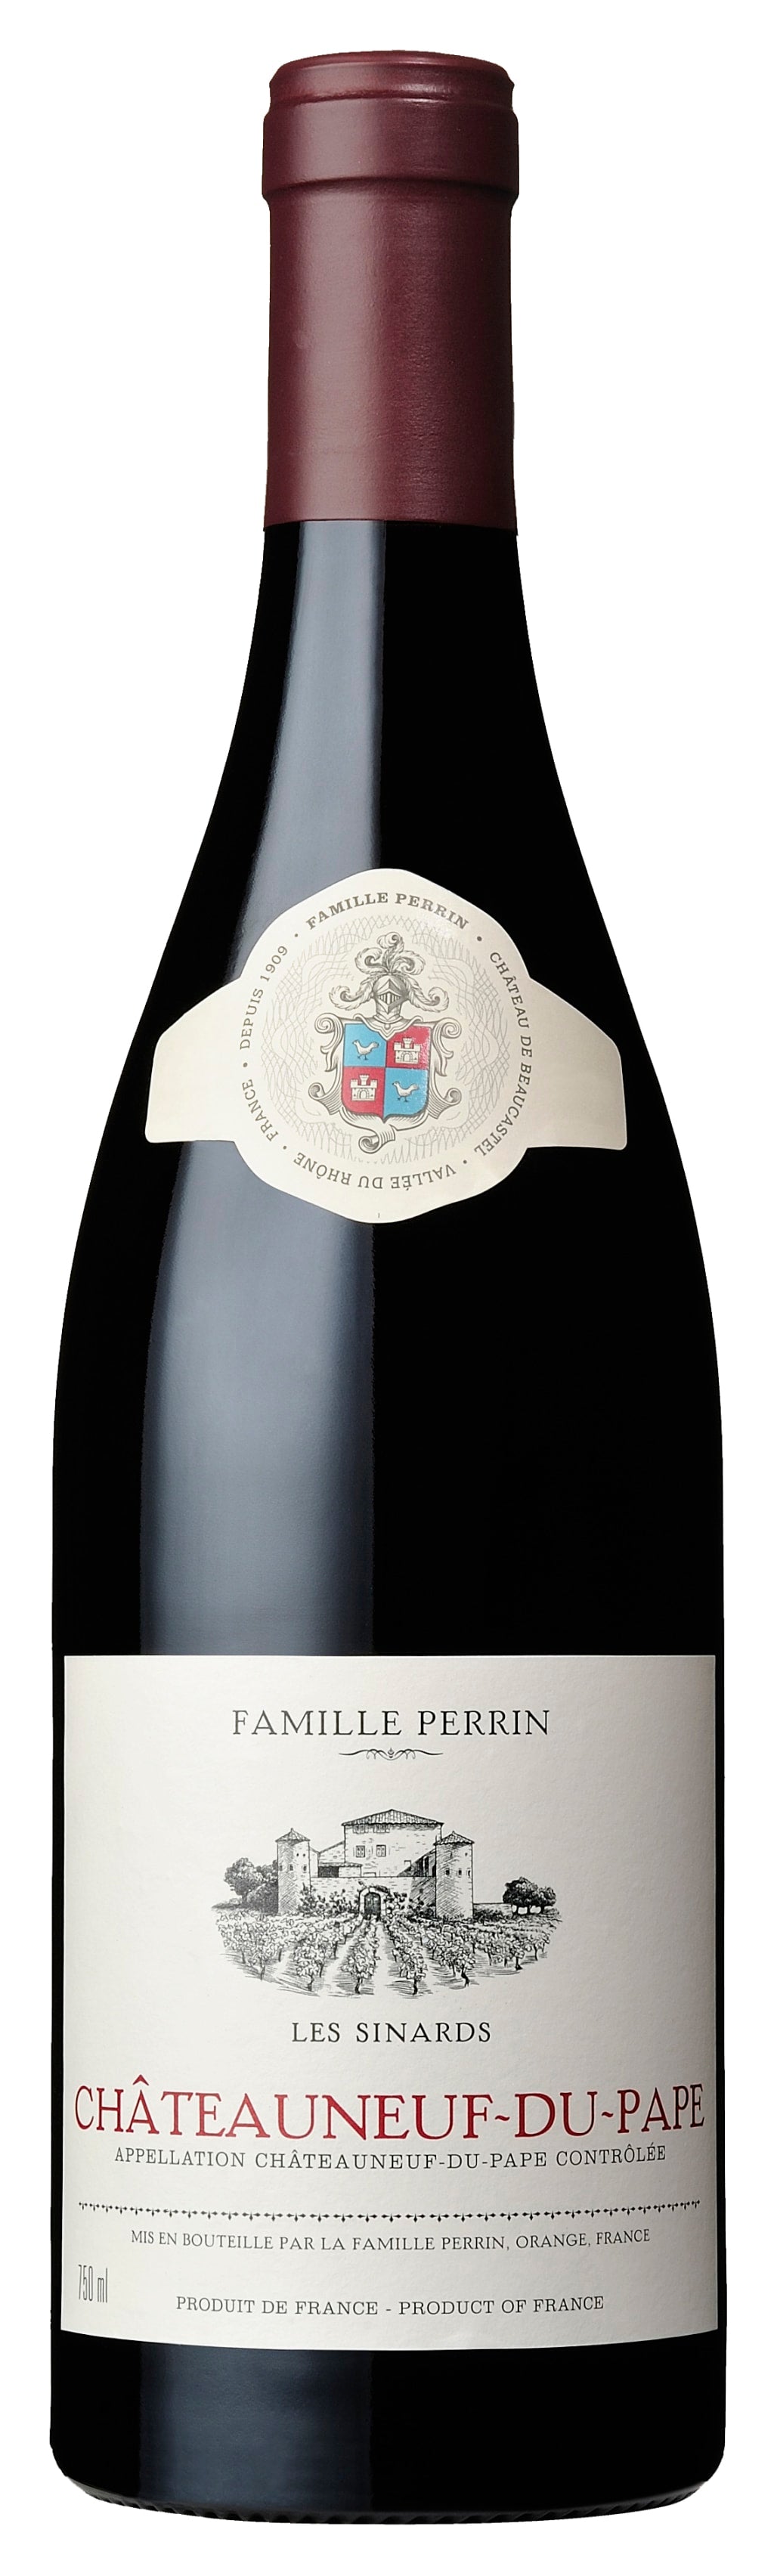 Famille Perrin Chateauneuf-Du-Pape Les Sinards 2015